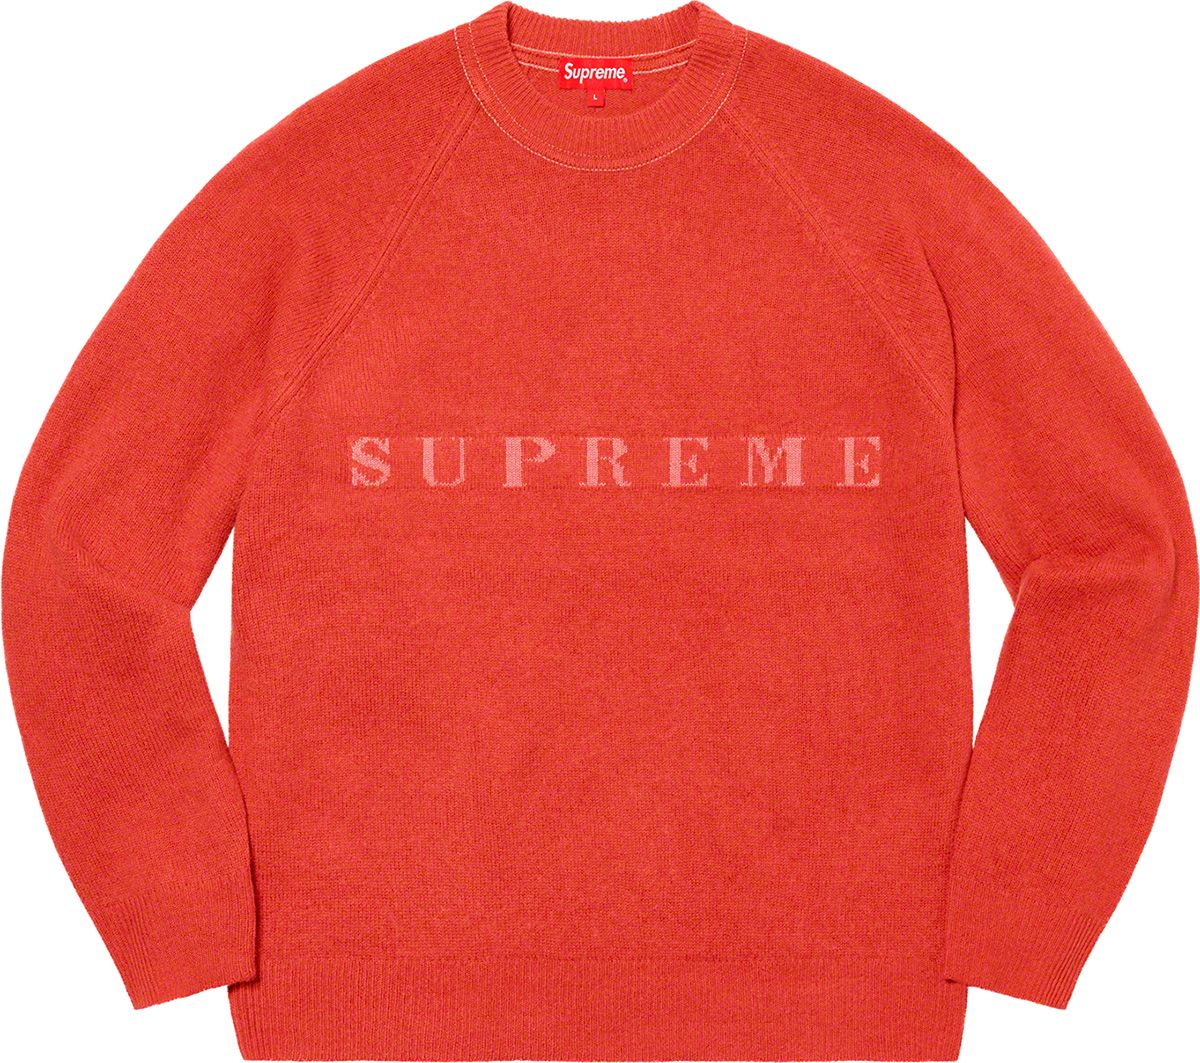 Crochet Hooded Zip Up Sweater - Fall/Winter 2020 Preview – Supreme